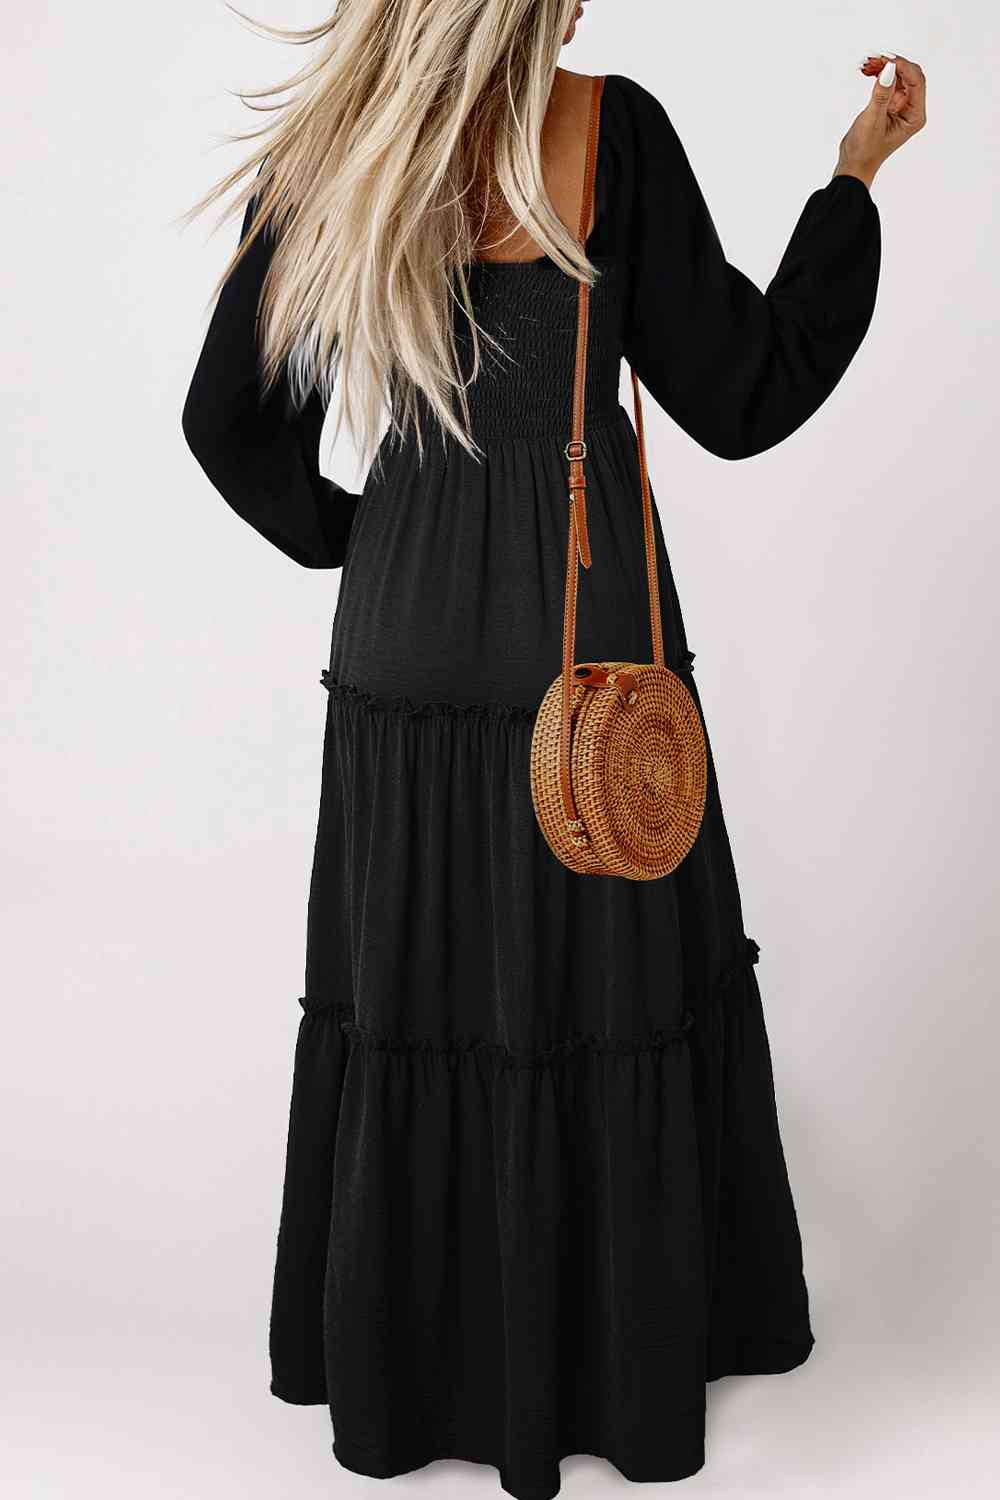 Gothic Glamour - Davinia Square Neck Long Sleeve Tiered Maxi Dress in Deep Black | Poundton